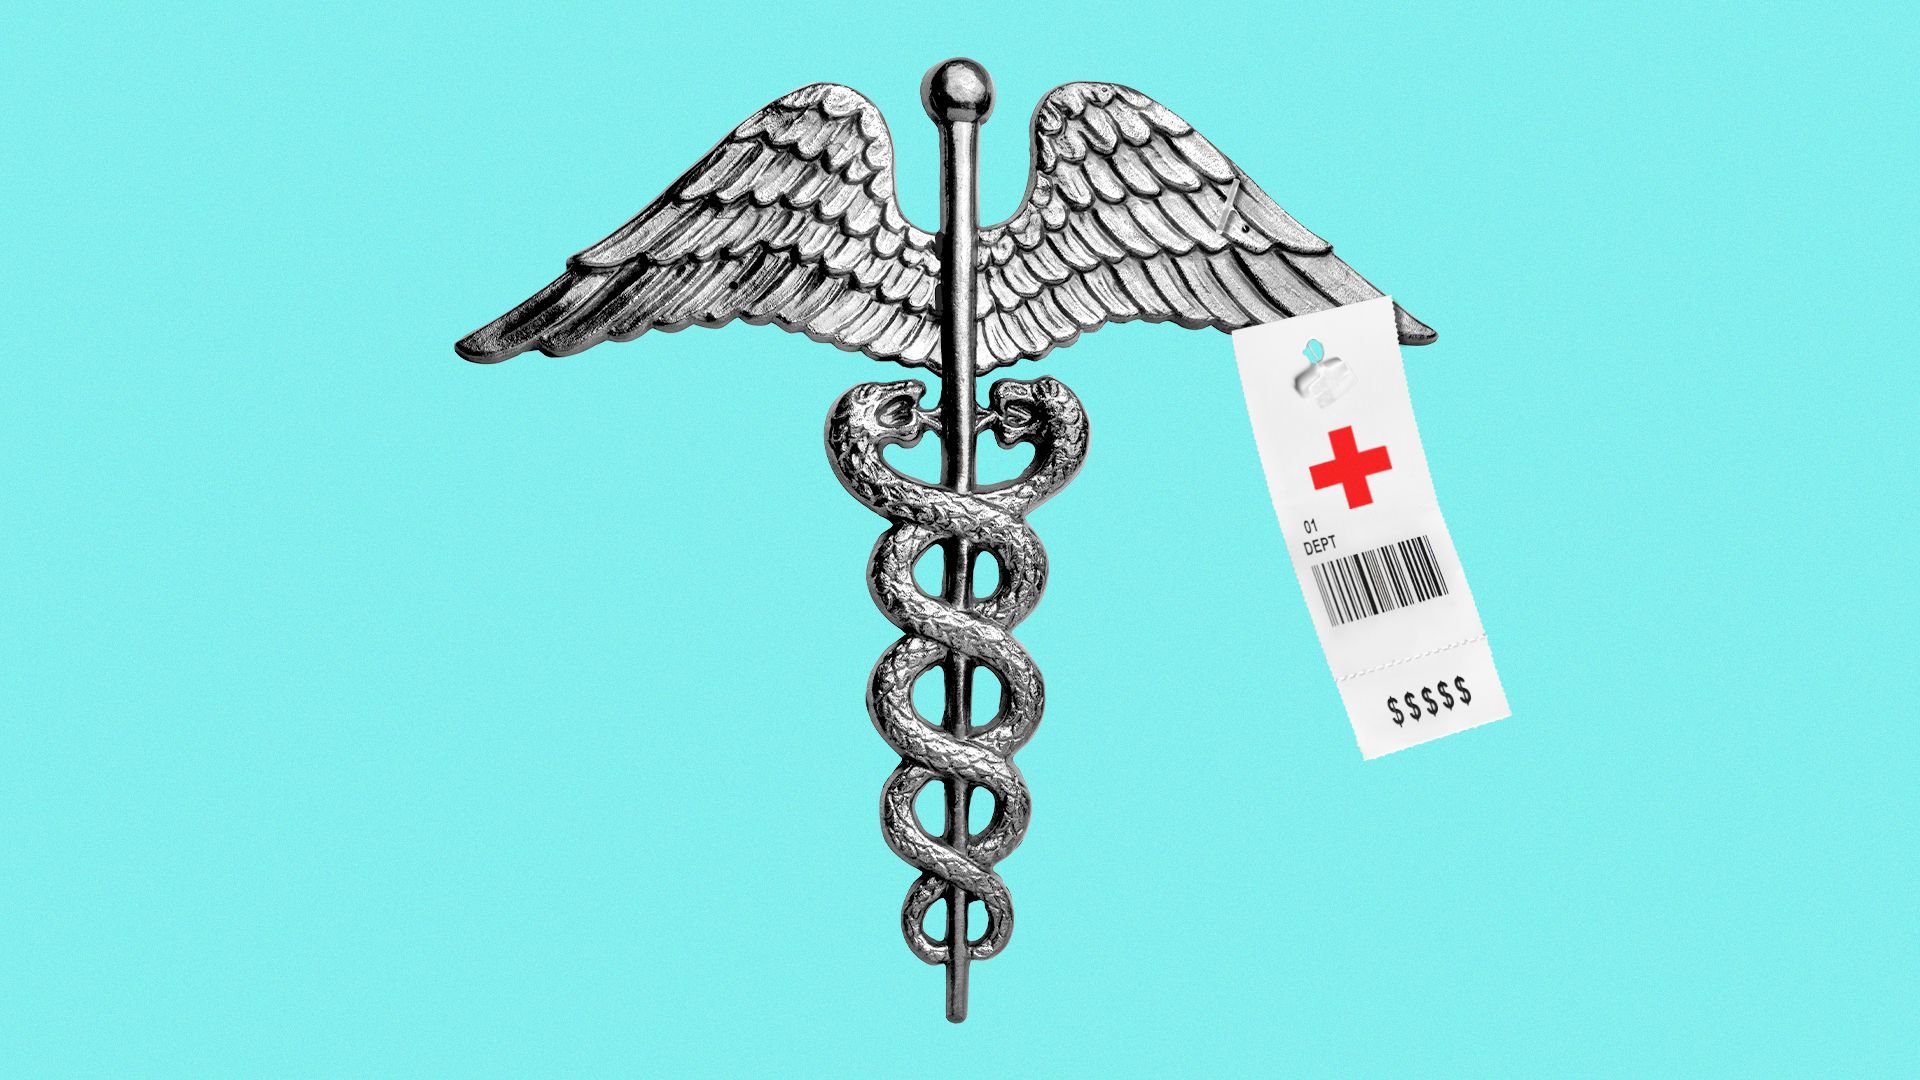 Illustration of a caduceus with a price tag